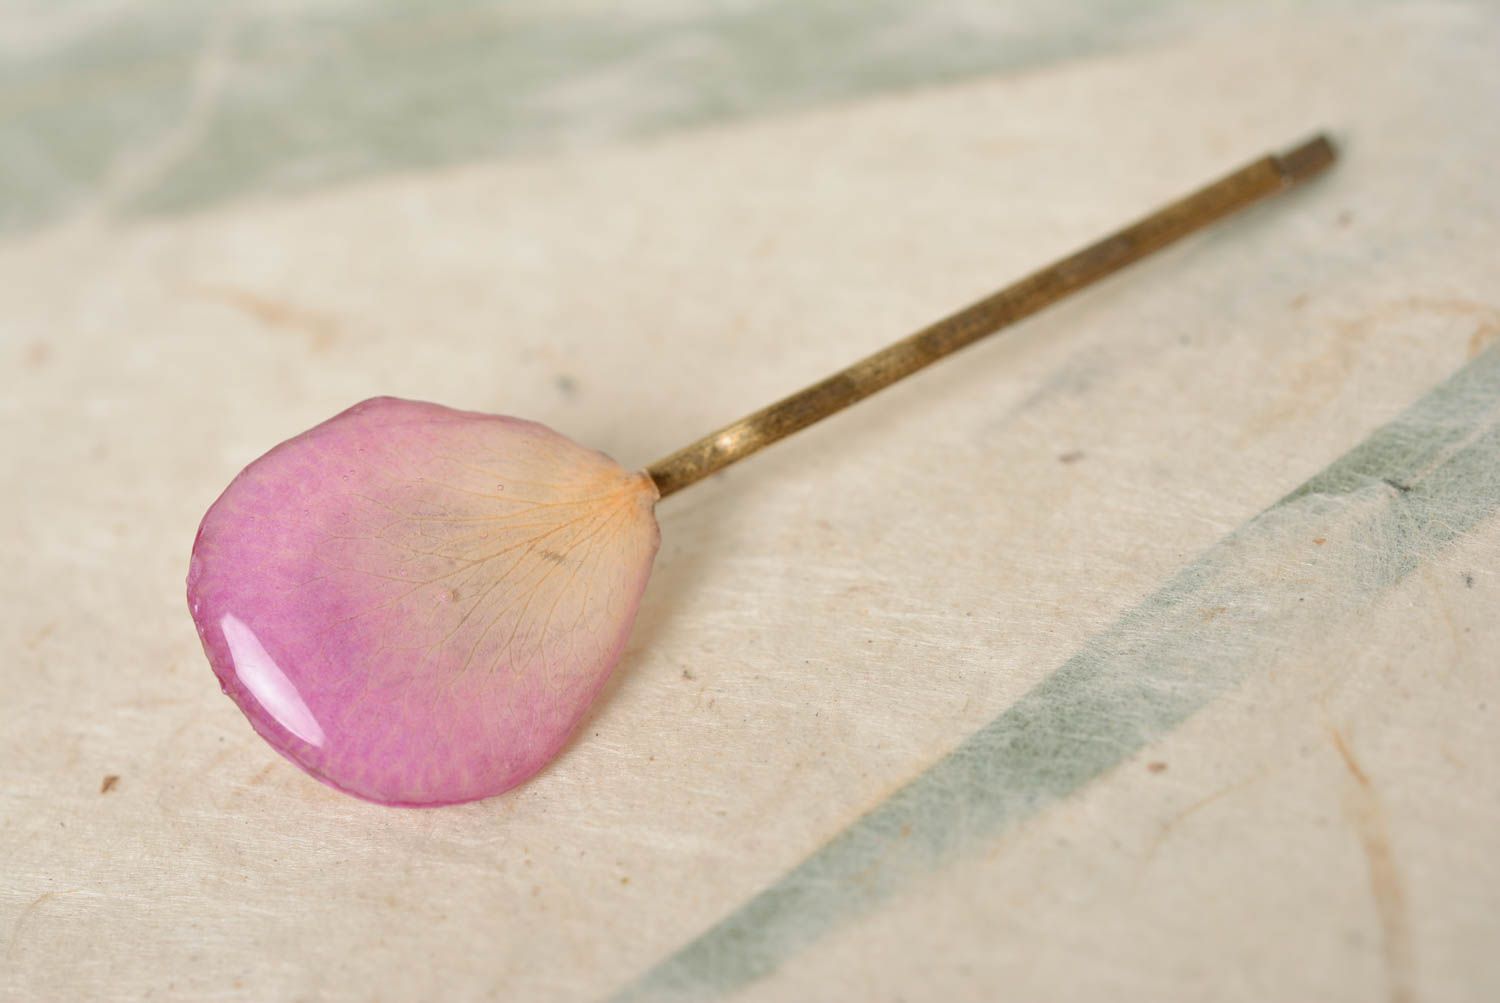 Handmade decorative metal hair pin with dried flower petal in epoxy resin photo 1